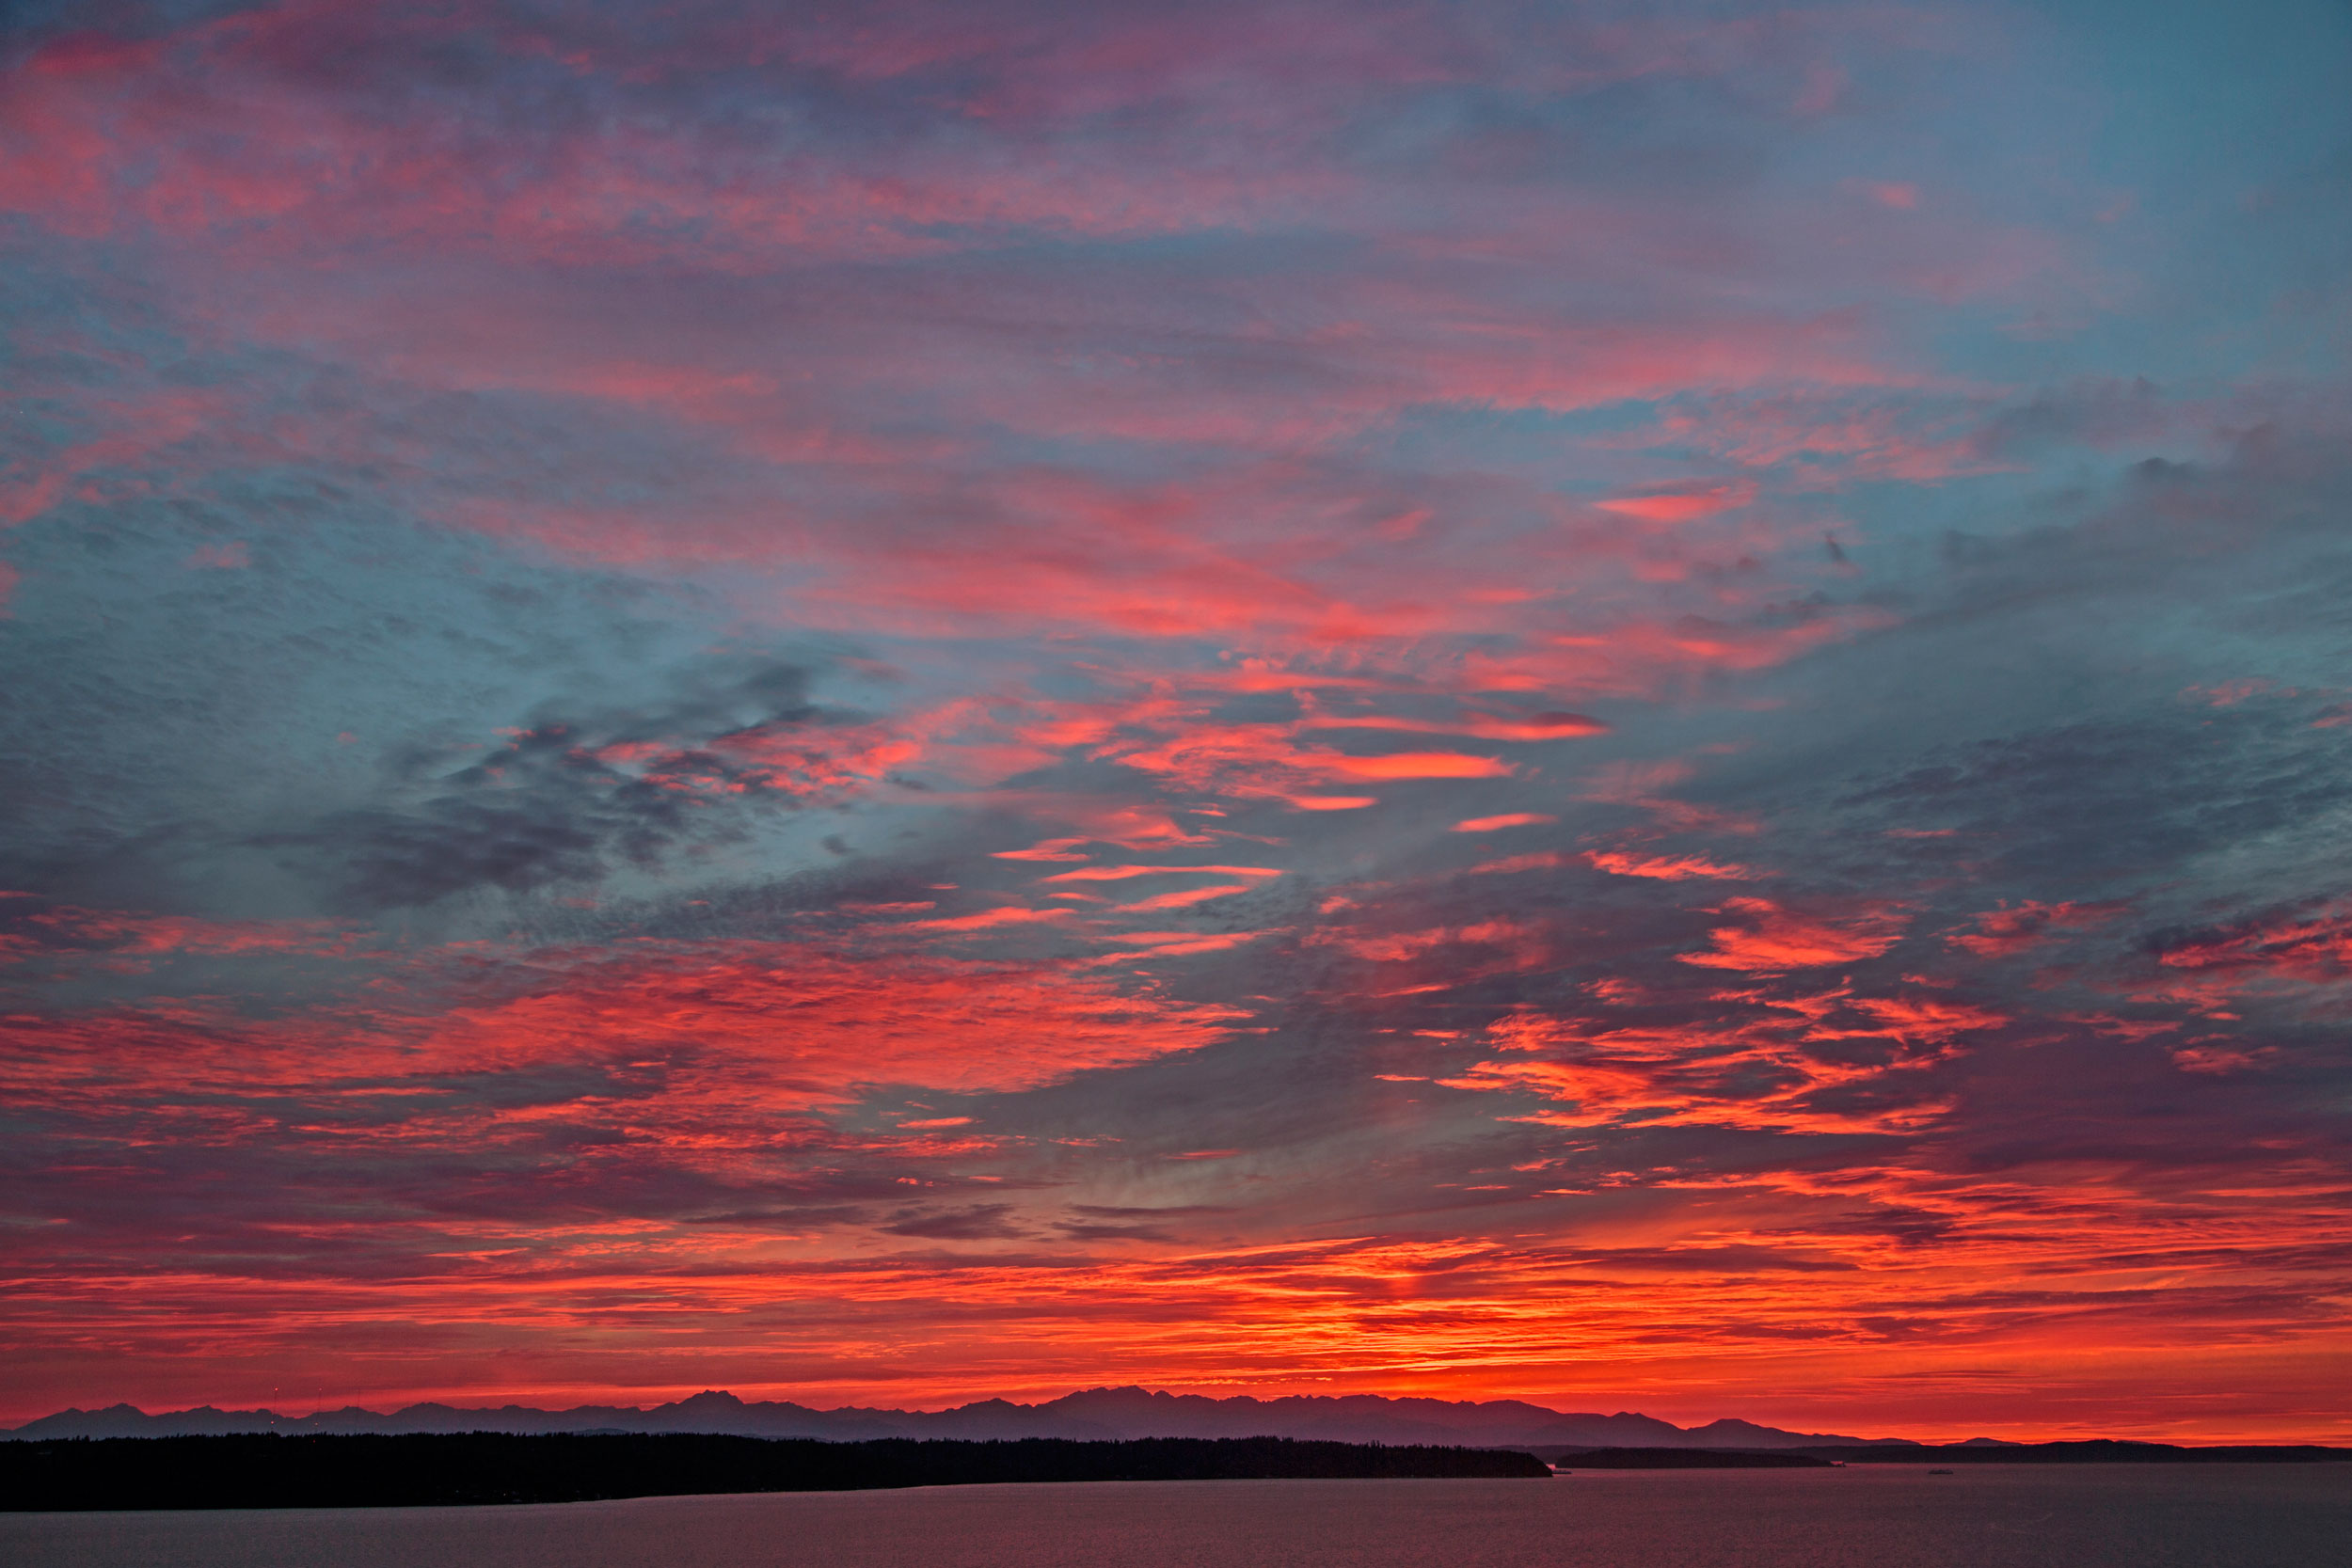 PHOTOS: Amazing red Sunset over the Olympics as seen from Burien ...